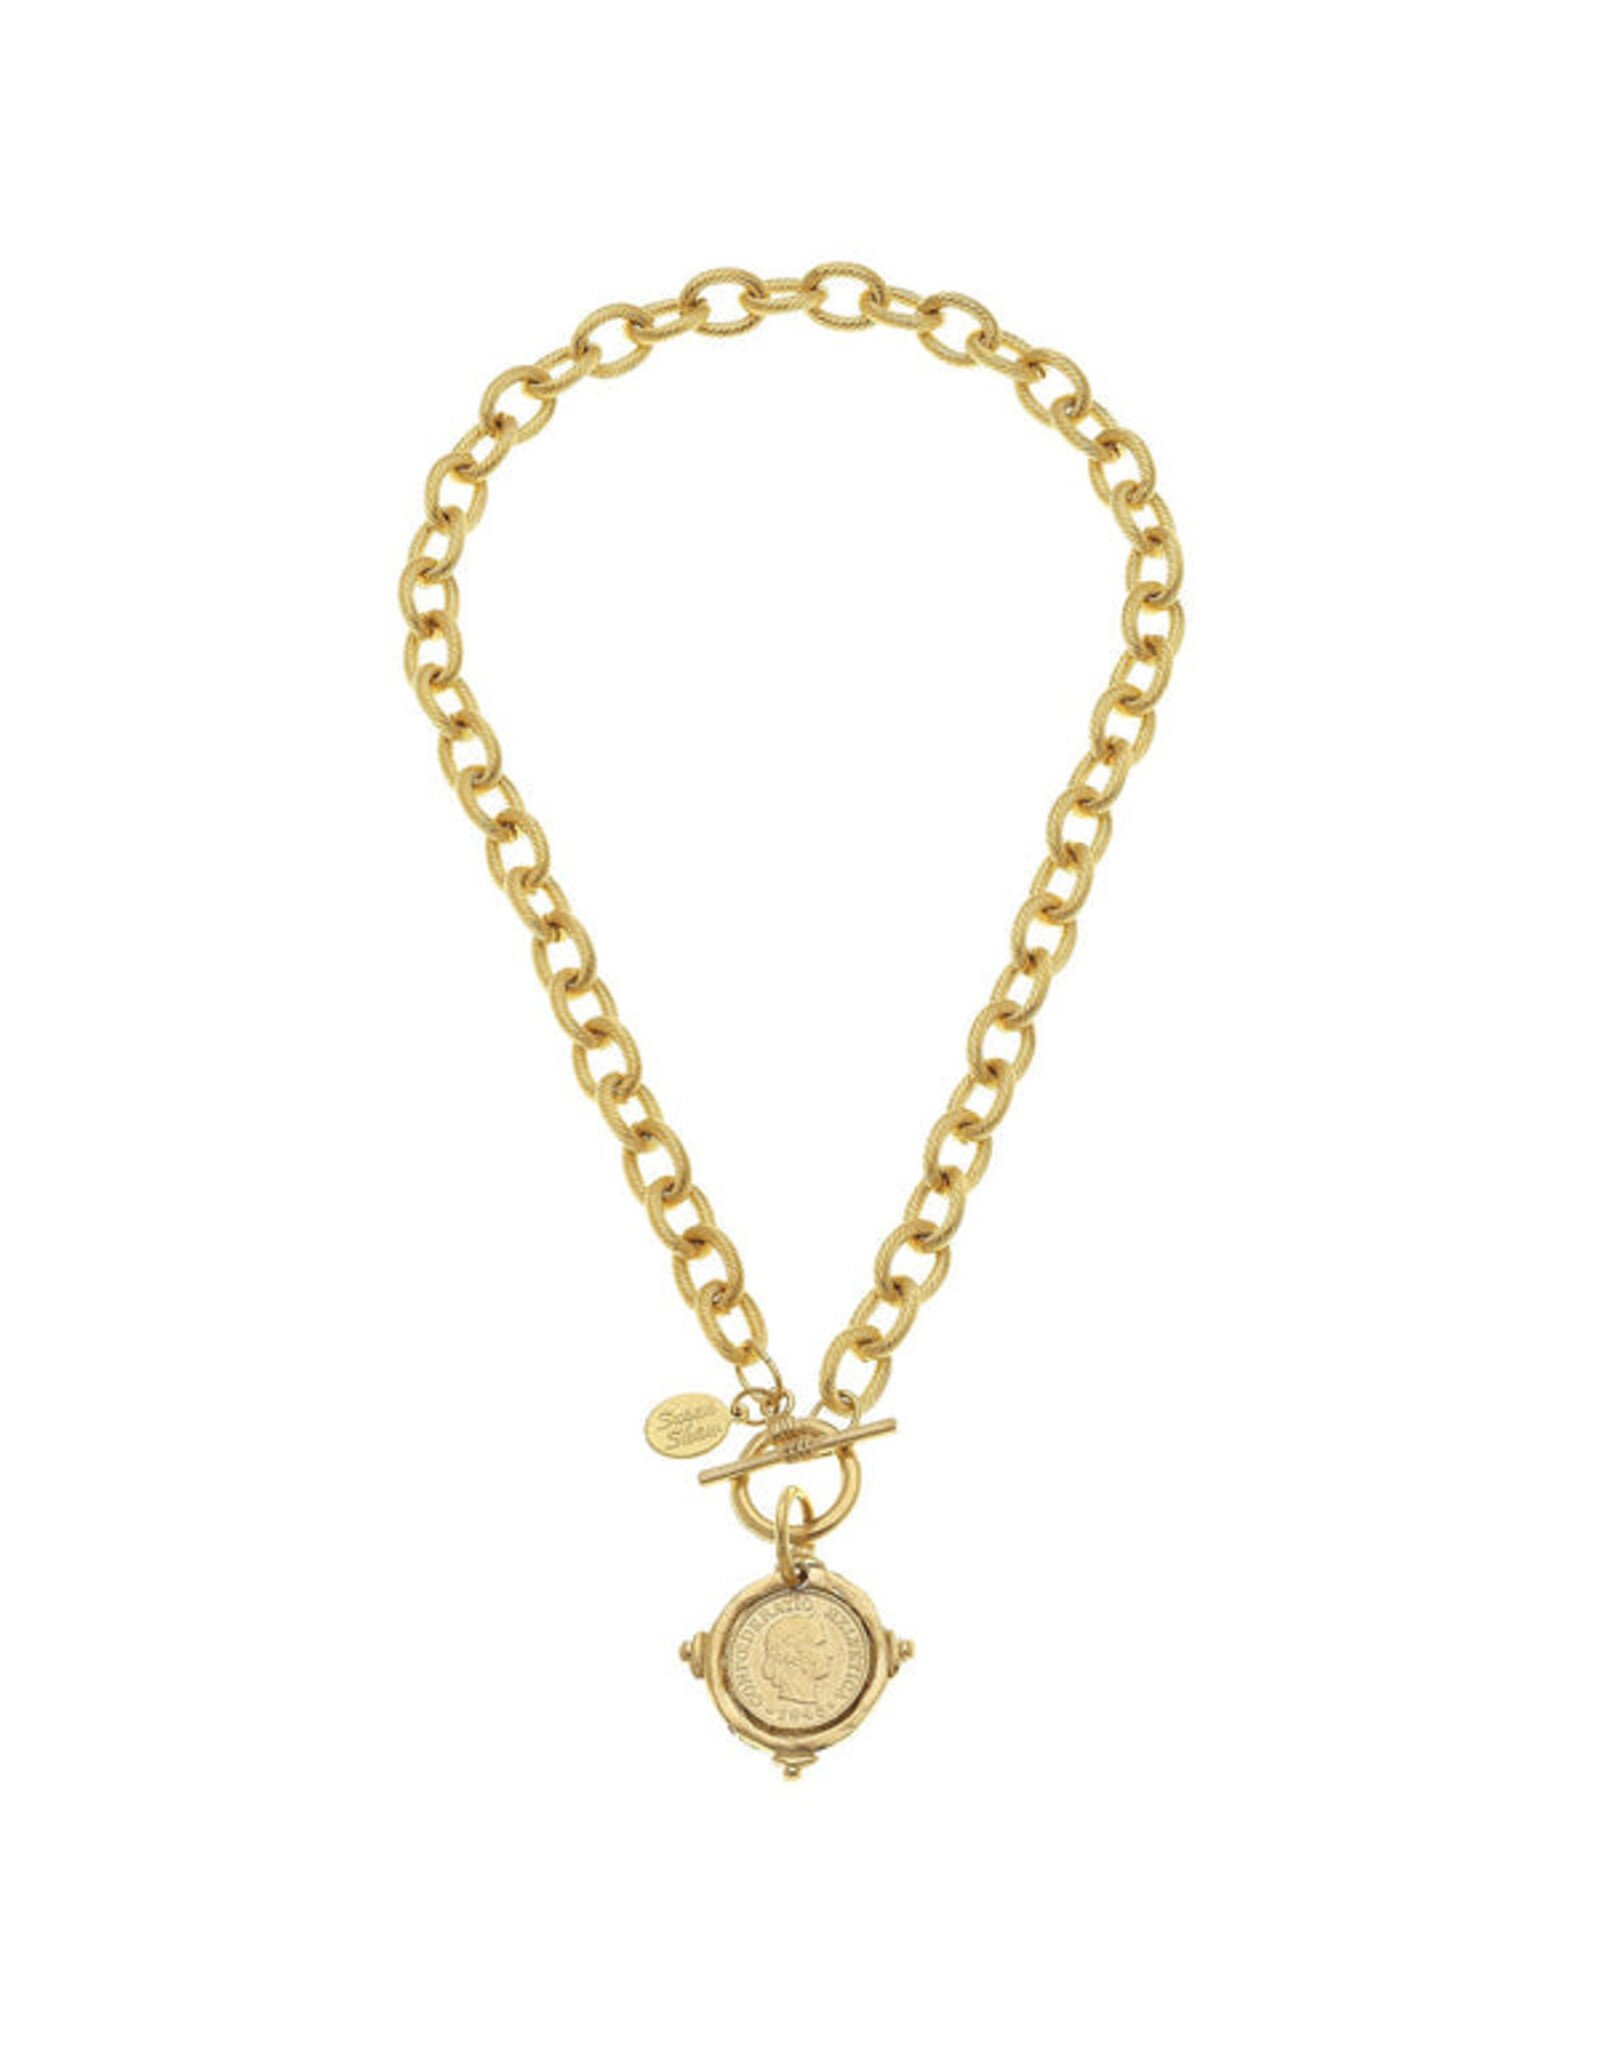 Susan Shaw Coin Toggle Necklace - 16 Inches